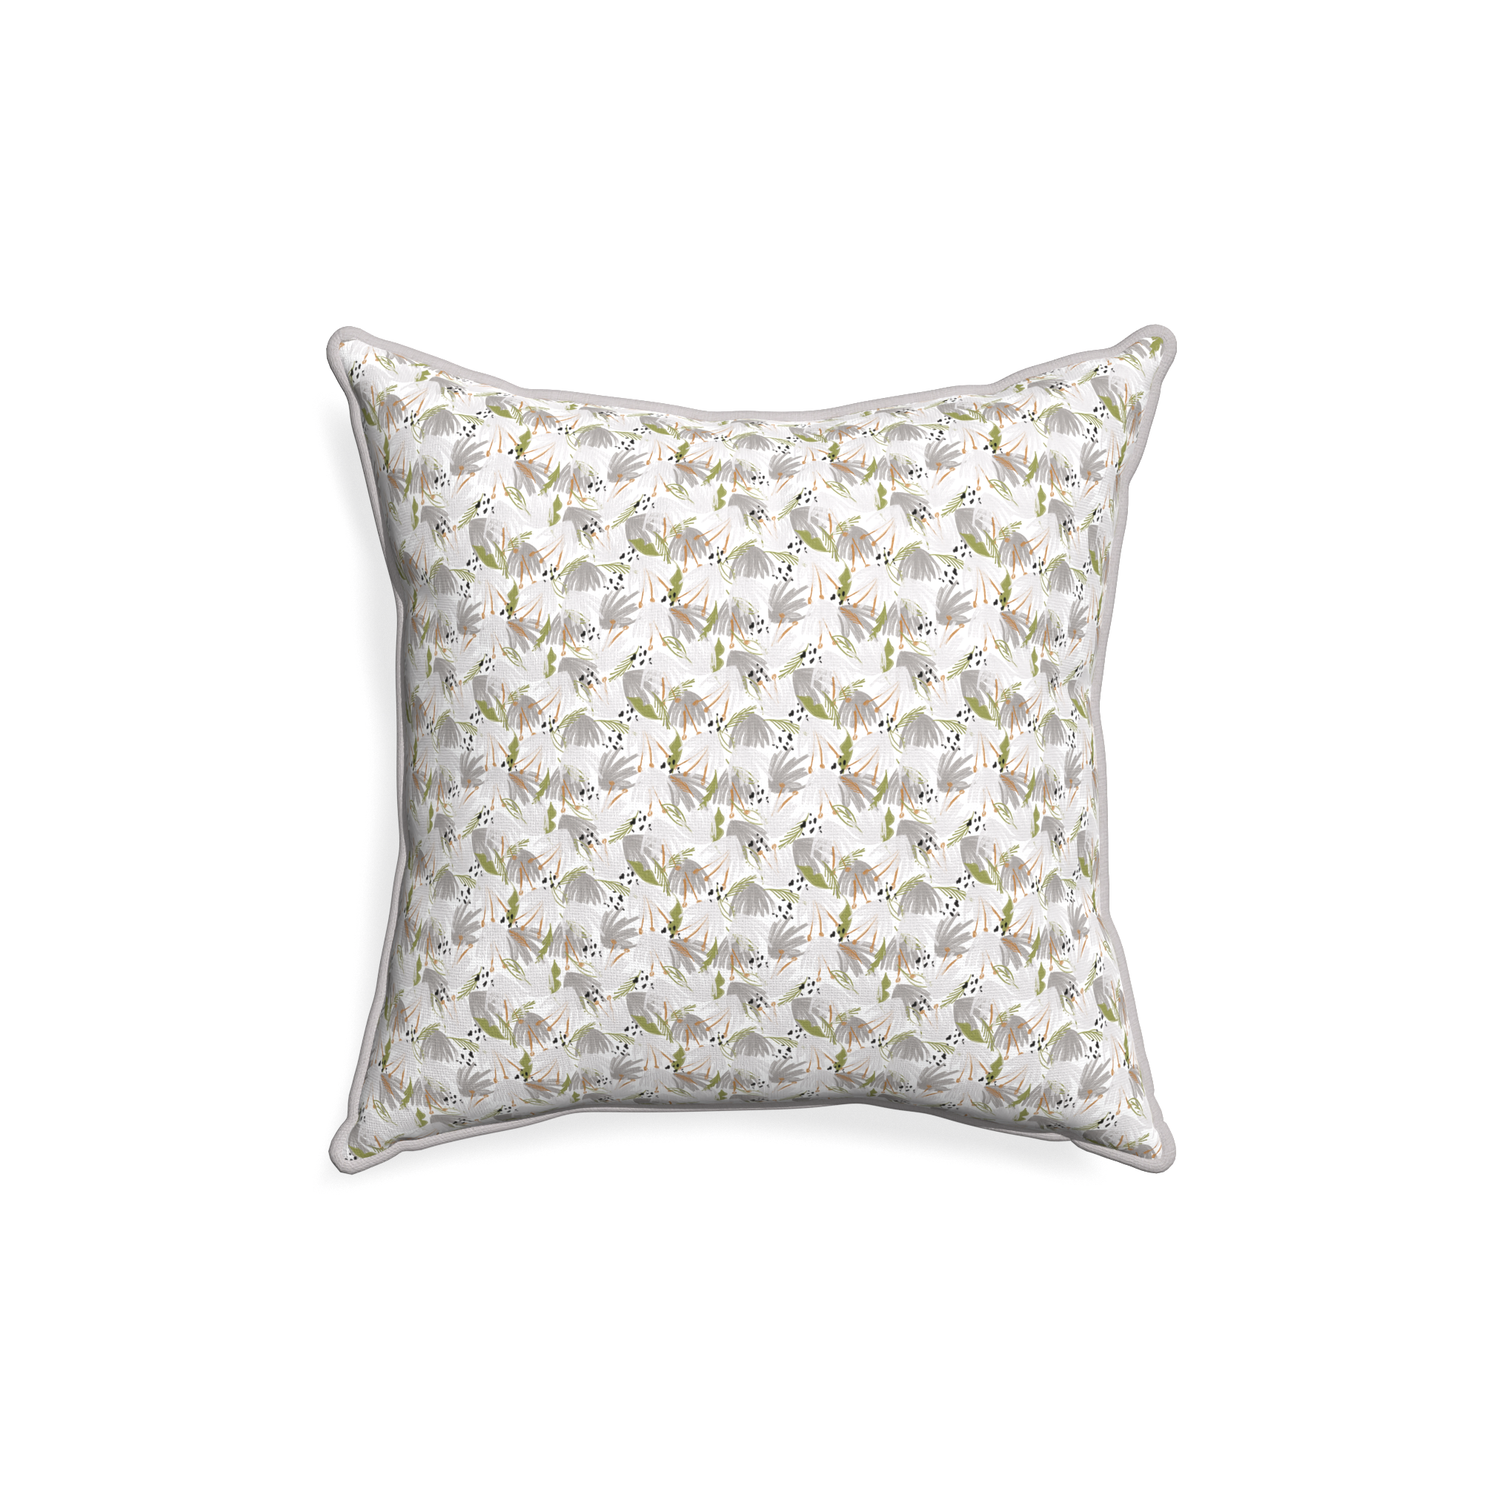 18-square eden grey custom grey floralpillow with pebble piping on white background